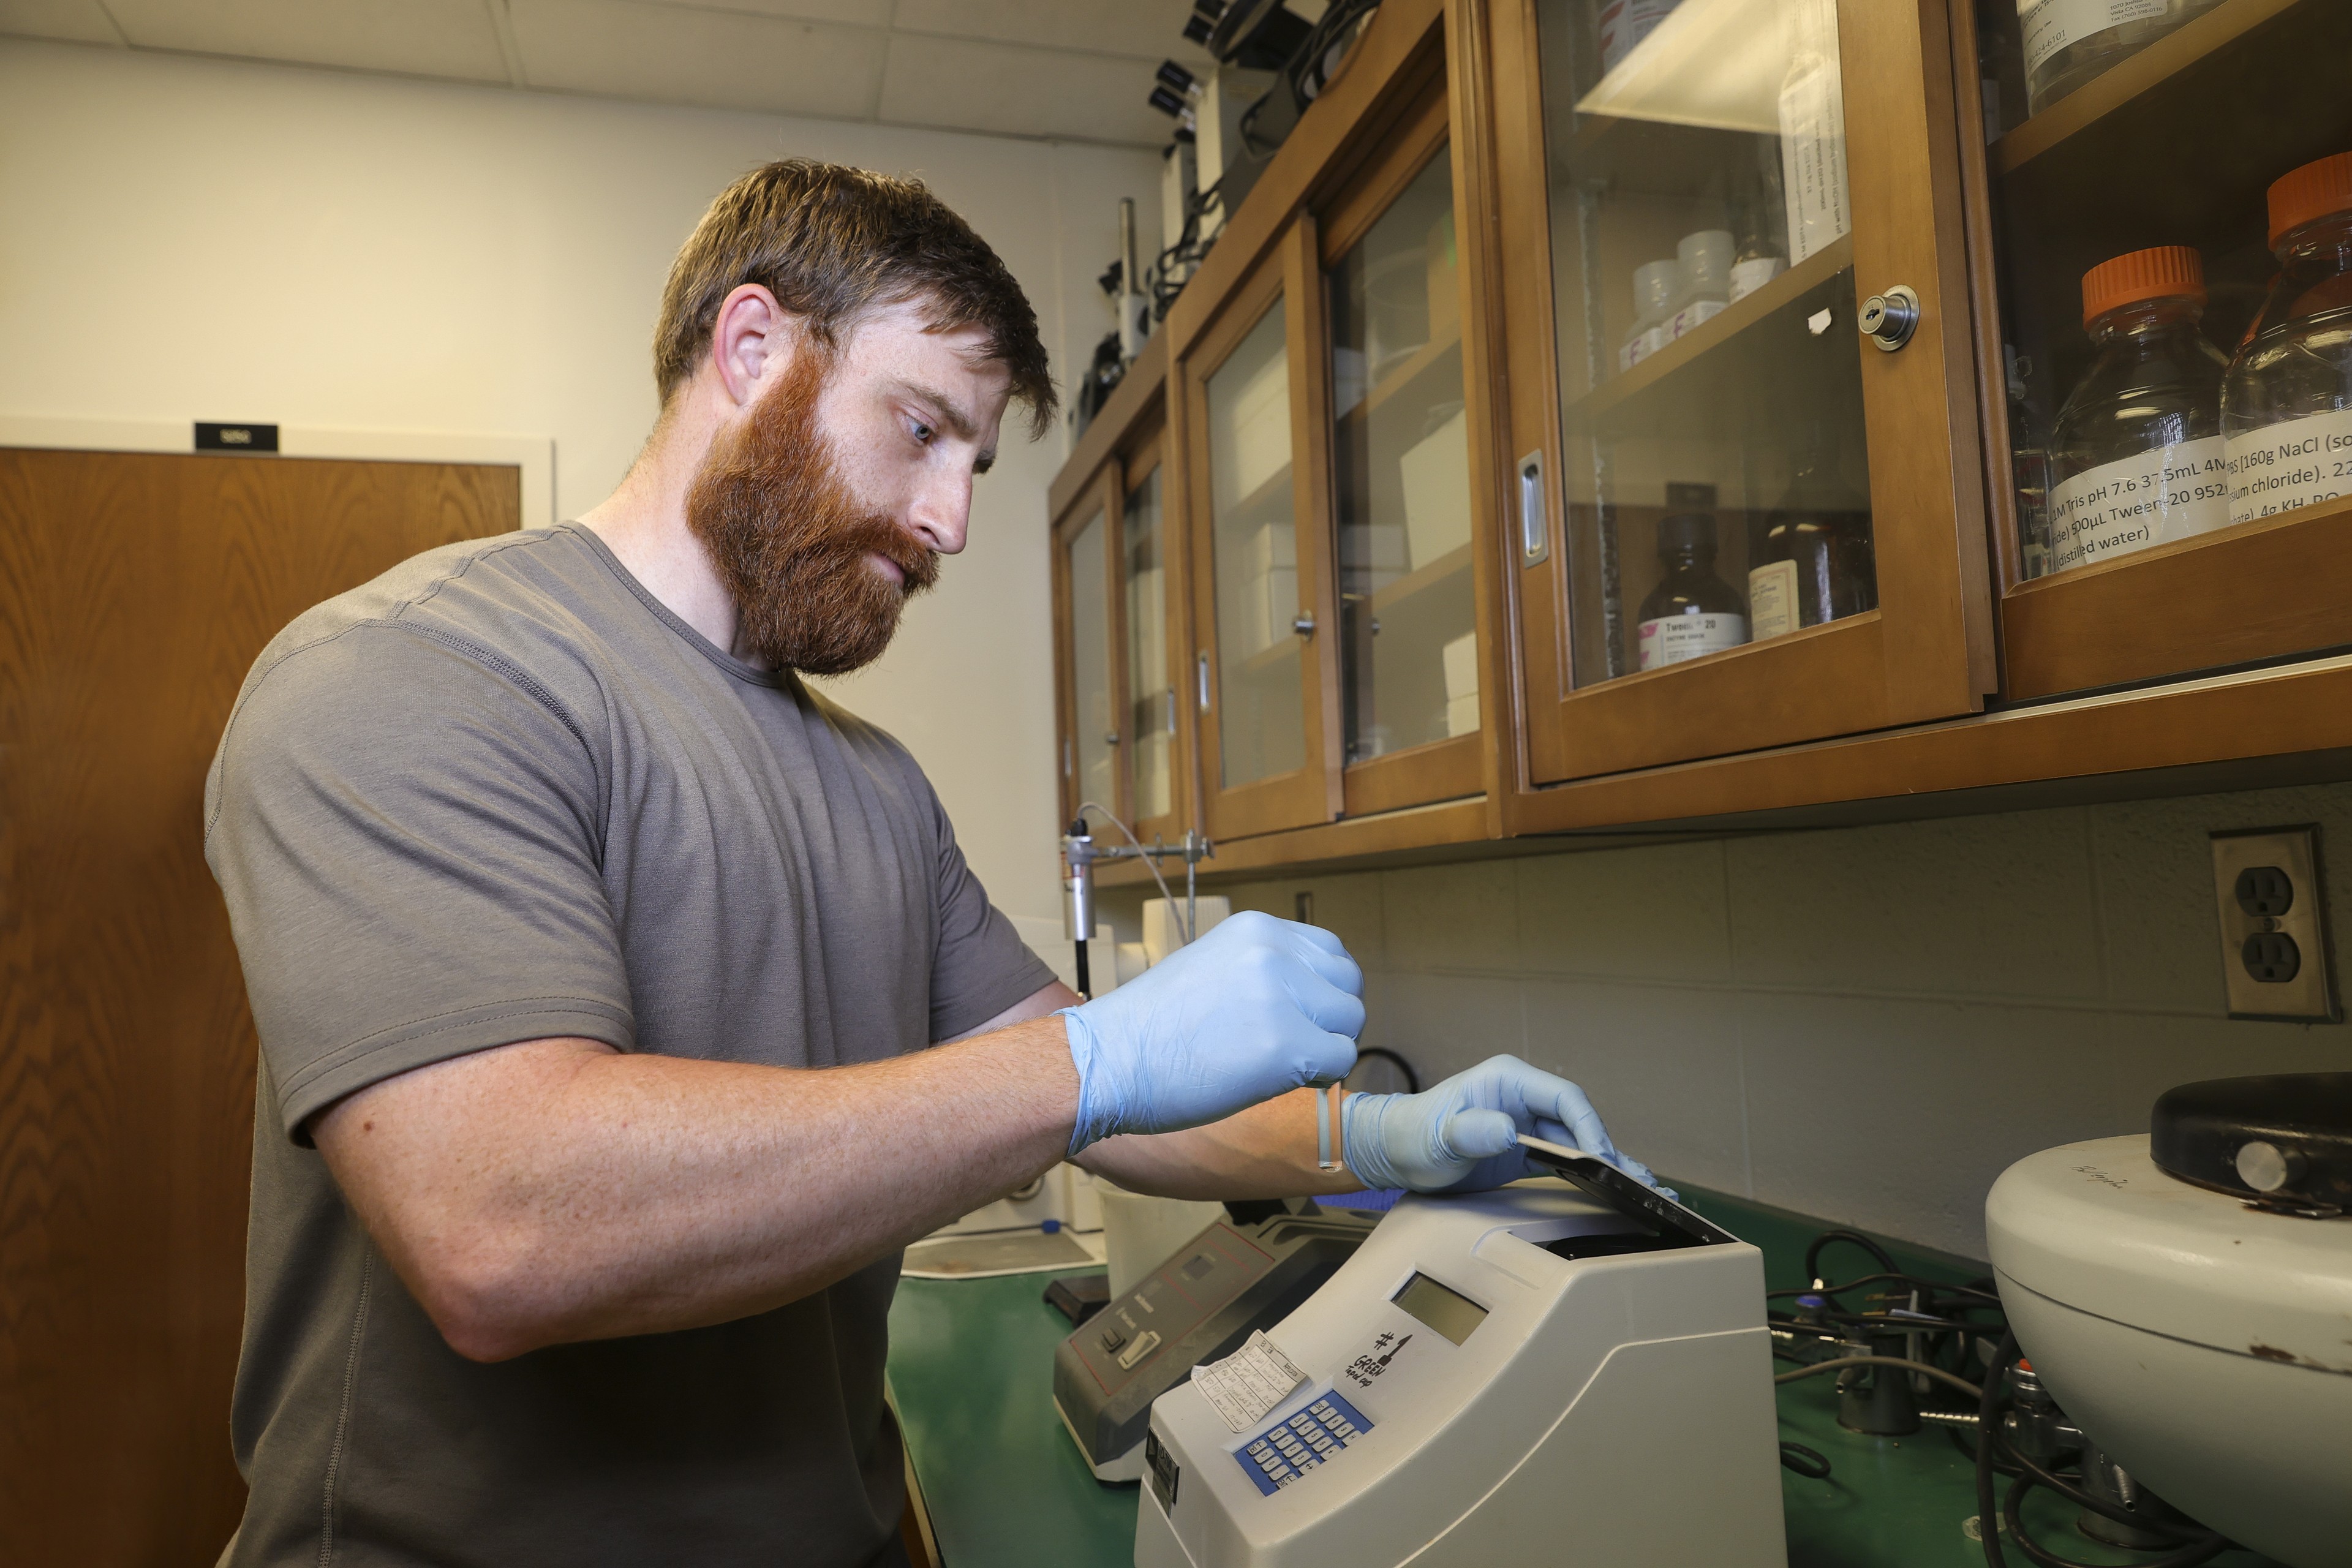 student, ryan wagner, wearing a grey tshirts, blue gloves testing a sample with equipment